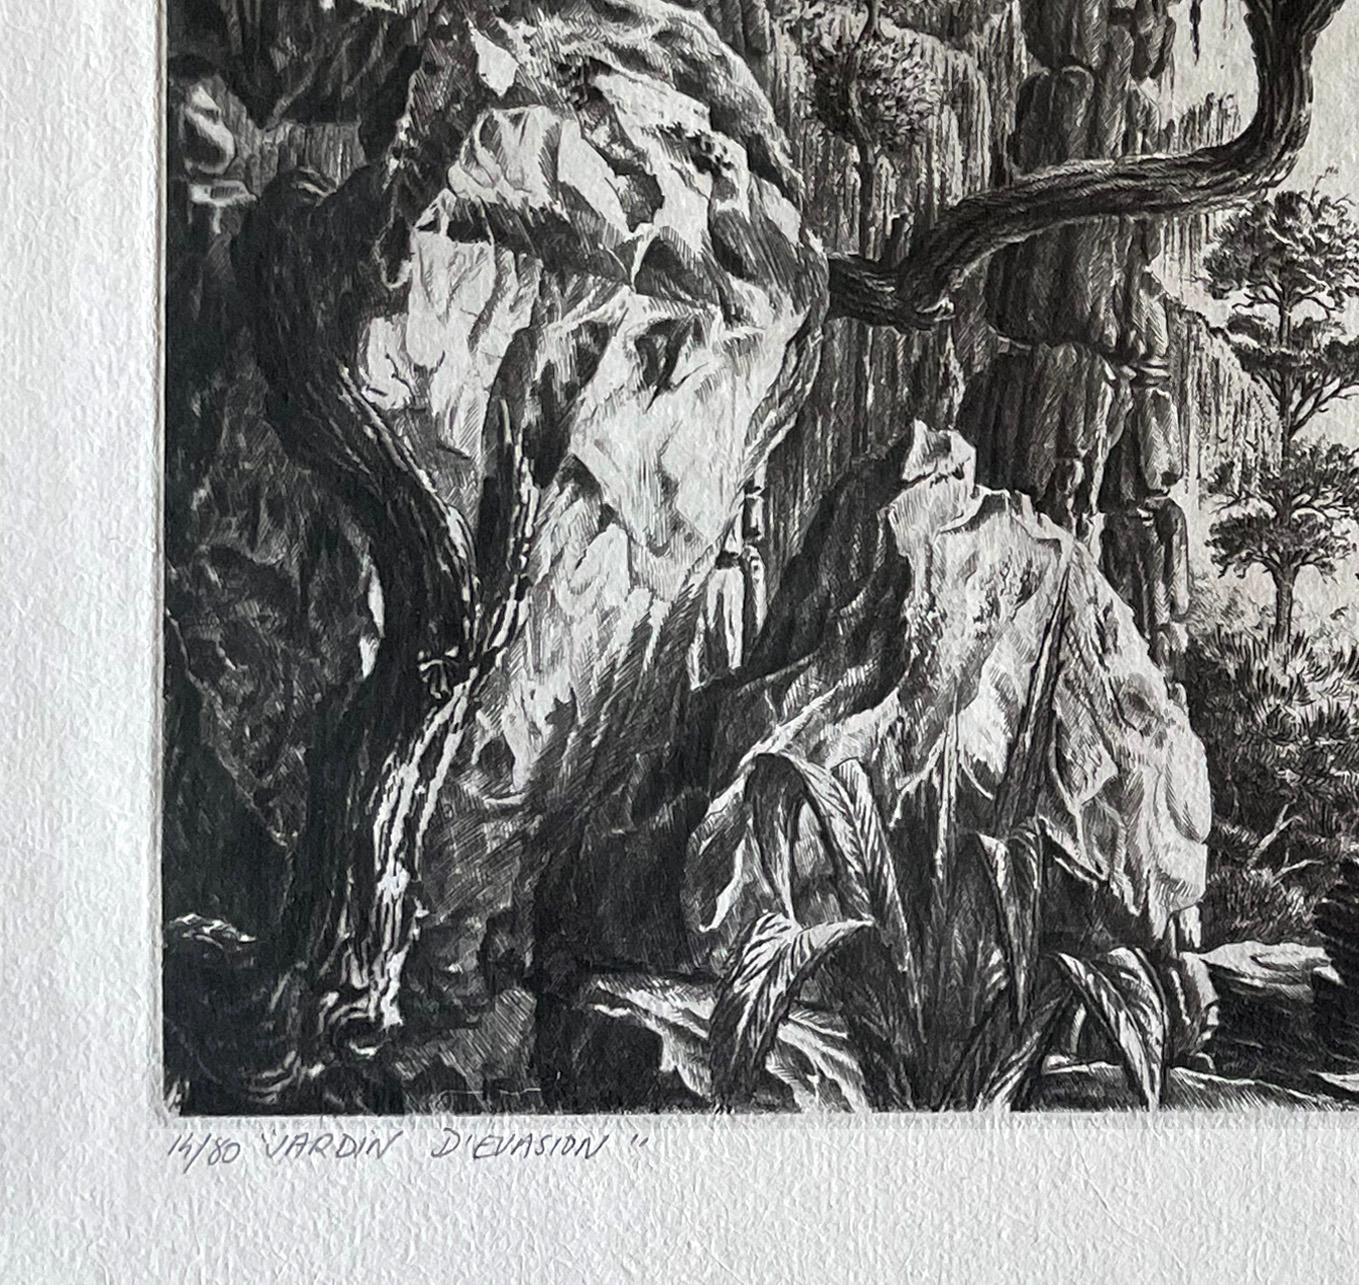 Signed and titled in pencil from the edition of 80. This is a great example of the texture and tone that can be achieved with drypoint.

In keeping with the best Italian traditions, Houtin's gardens are well furnished with fragmentary architecture